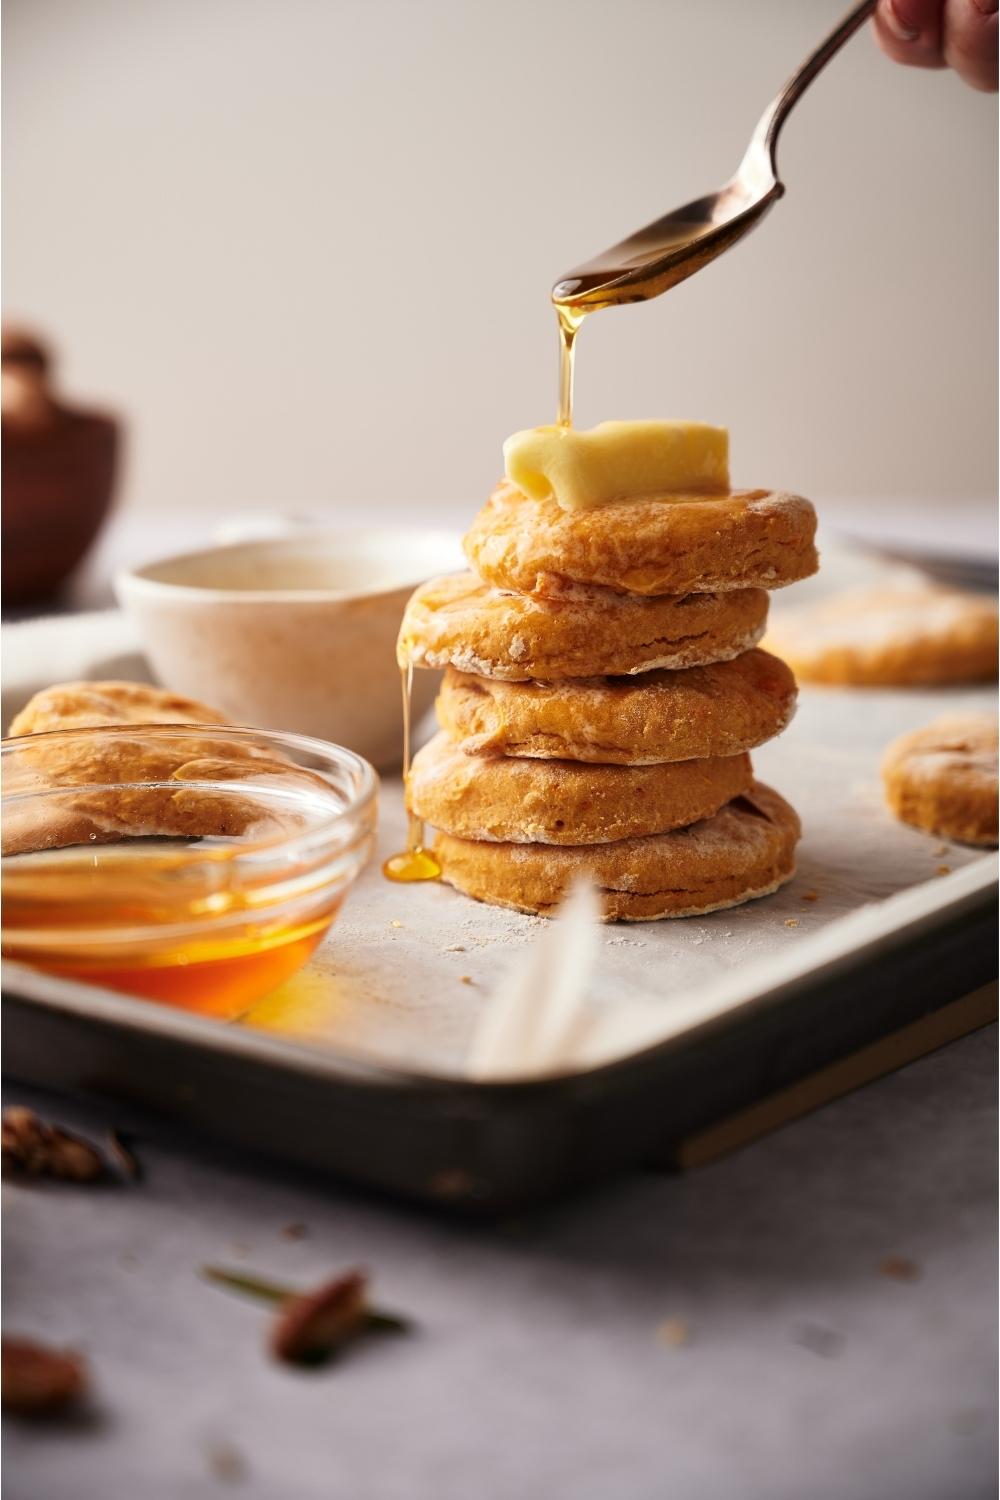 A stack of sweet potato biscuits on a baking sheet with a hand pouring maple syrup over top of the biscuits.